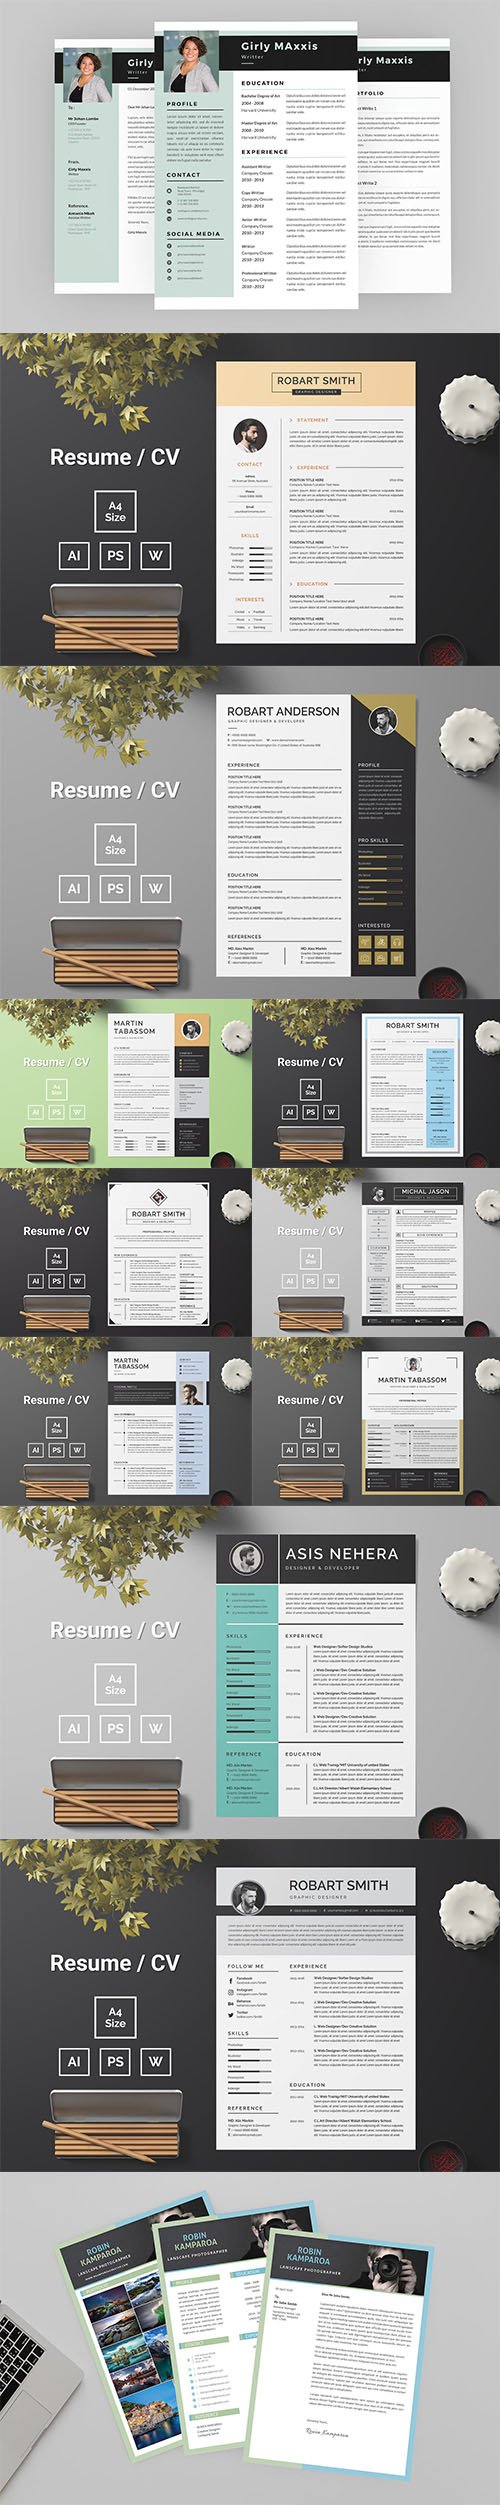 CV & Resume Template PSD and AI Pack Vol2